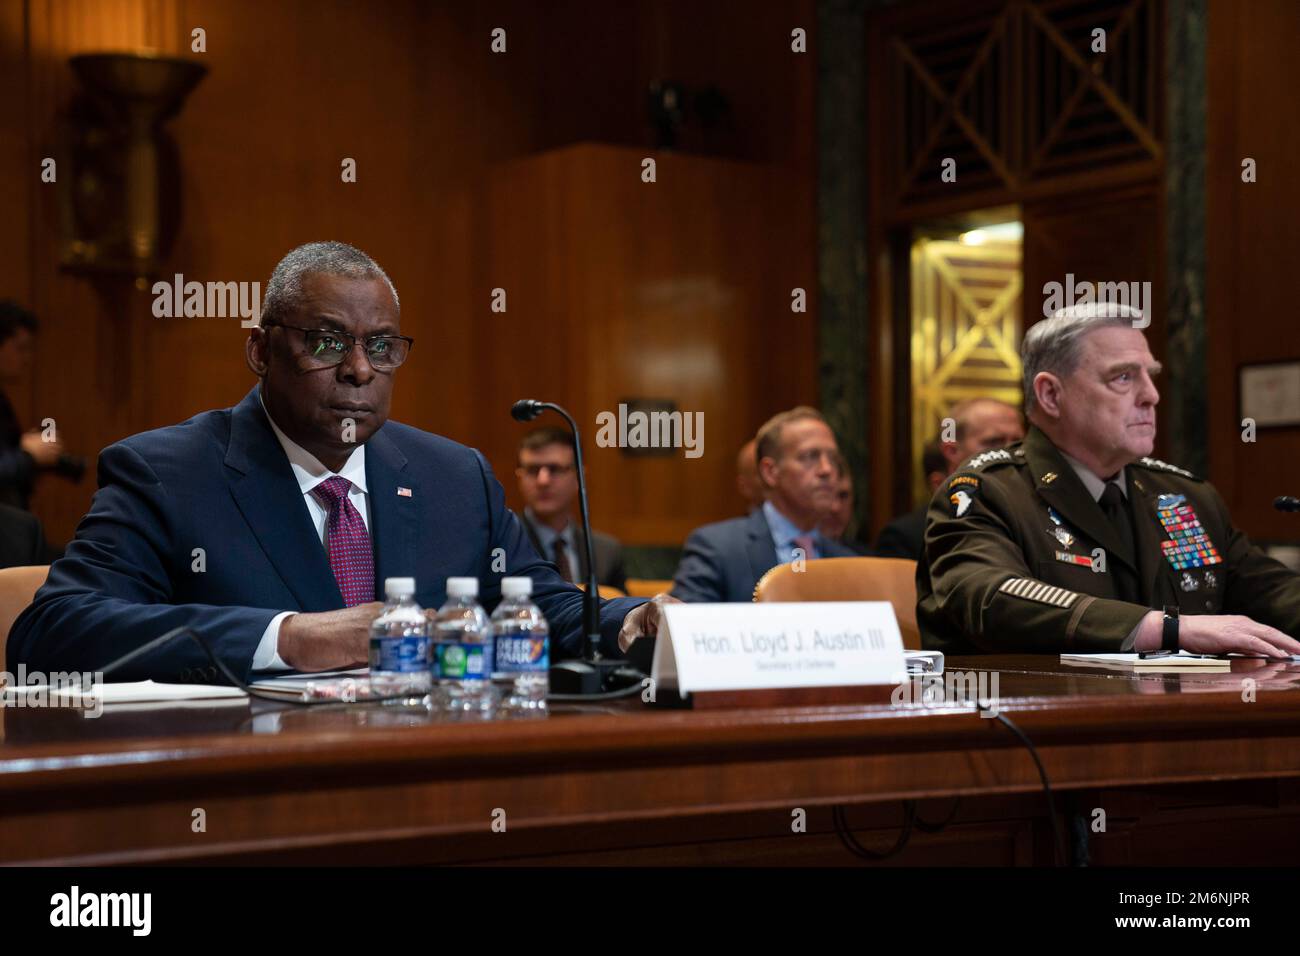 Secretary of Defense Lloyd J. Austin III and Army Gen. Mark A. Milley, chairman of the Joint Chiefs of Staff, testify at a Senate Appropriations Subcommittee on Defense hearing on the fiscal 2023 funding request and budget justification for the Department of Defense at the Dirksen Senate Office Building, Washington D.C., May 3, 2022. (DOD Photo by Navy Chief Petty Officer Carlos M. Vazquez II) Stock Photo